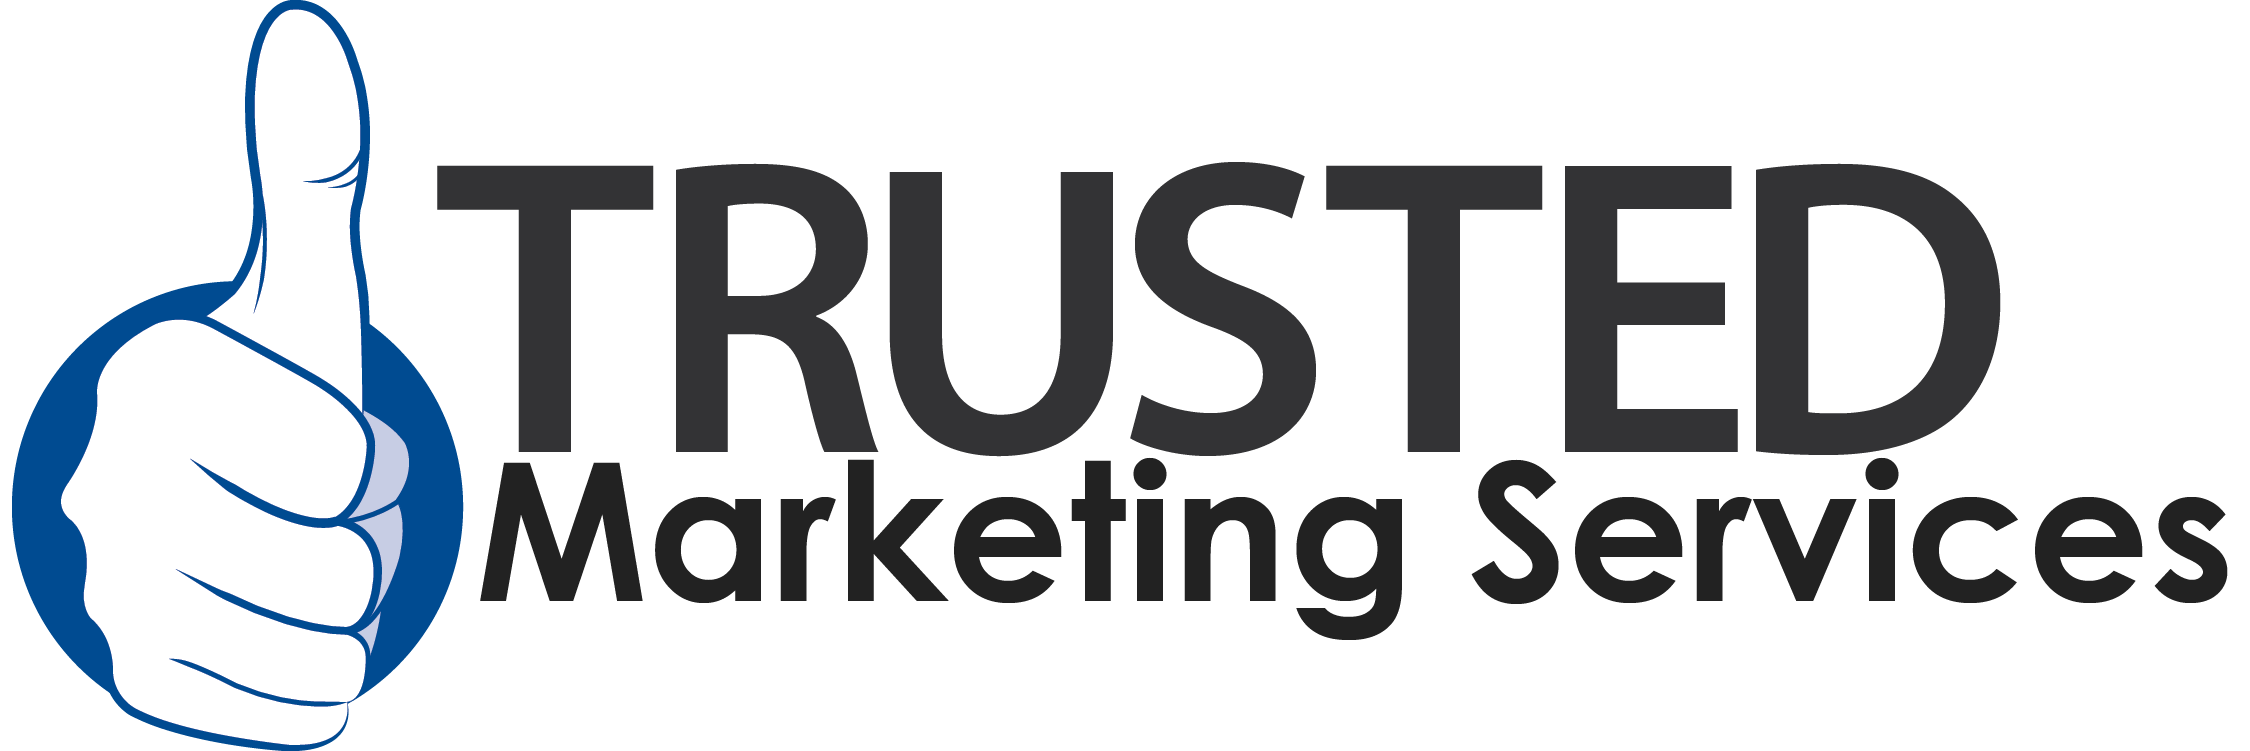 Marketing Service Logo - Trusted Marketing Services: Get Additional Information About Trusted ...